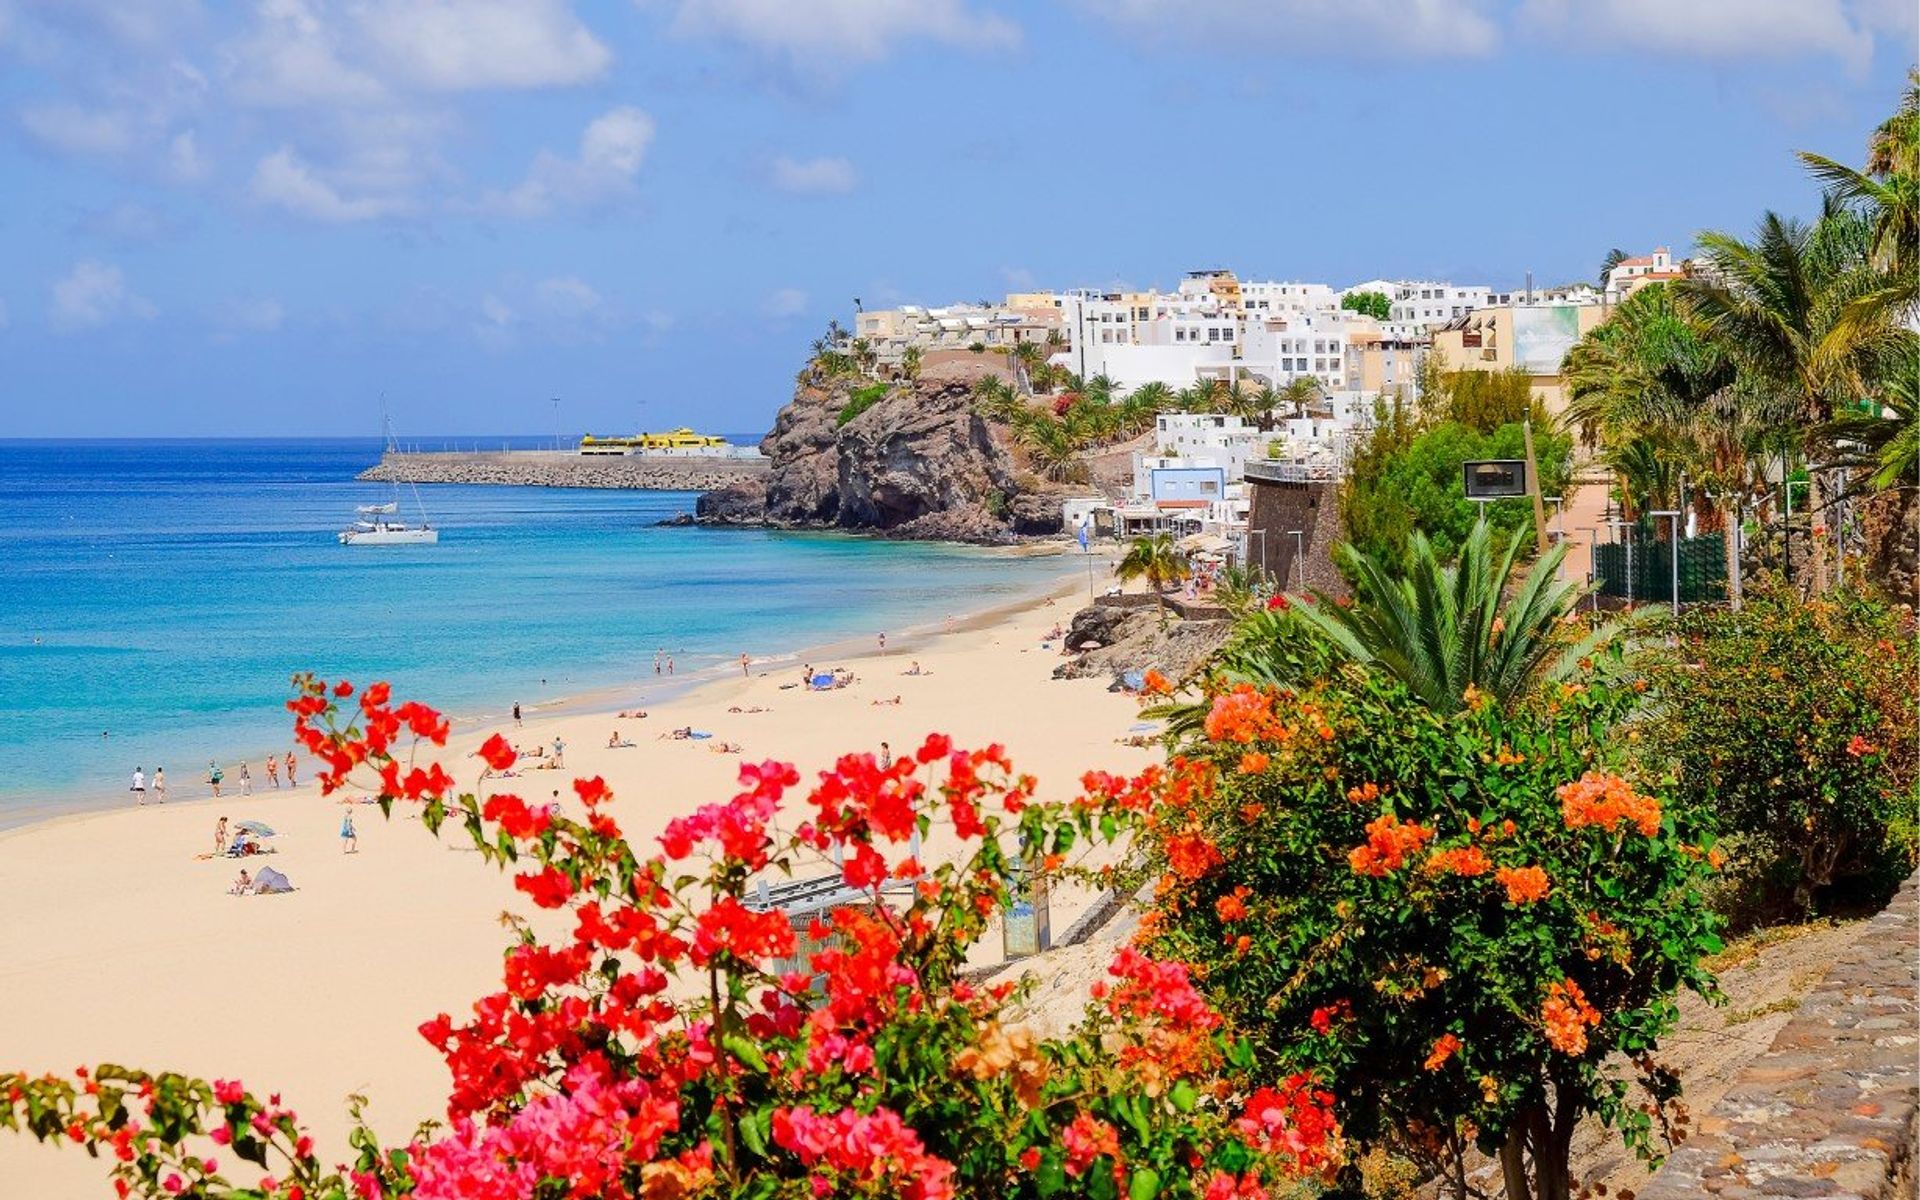 Morro Jable beach is one of the most beautiful stretches of coast in the Canaries boasting 4km of white sand